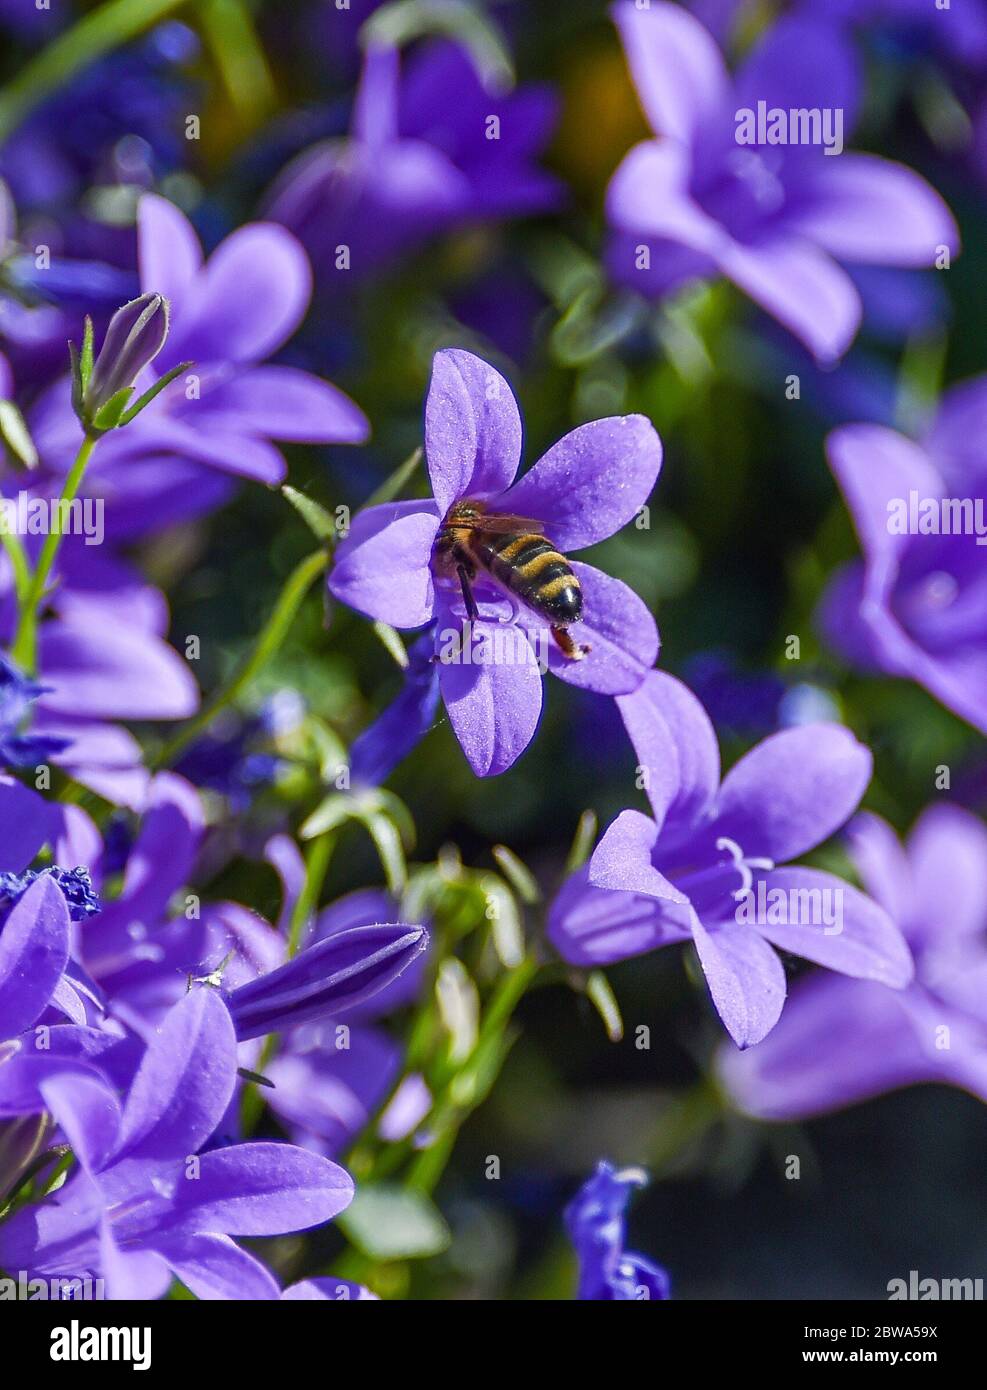 Brighton UK 31st May 2020 - Bees feeding from campanula plants on a beautiful sunny Spring morning in a Brighton garden during the Coronavirus COVID-19 pandemic crisis  . Credit: Simon Dack / Alamy Live News Stock Photo